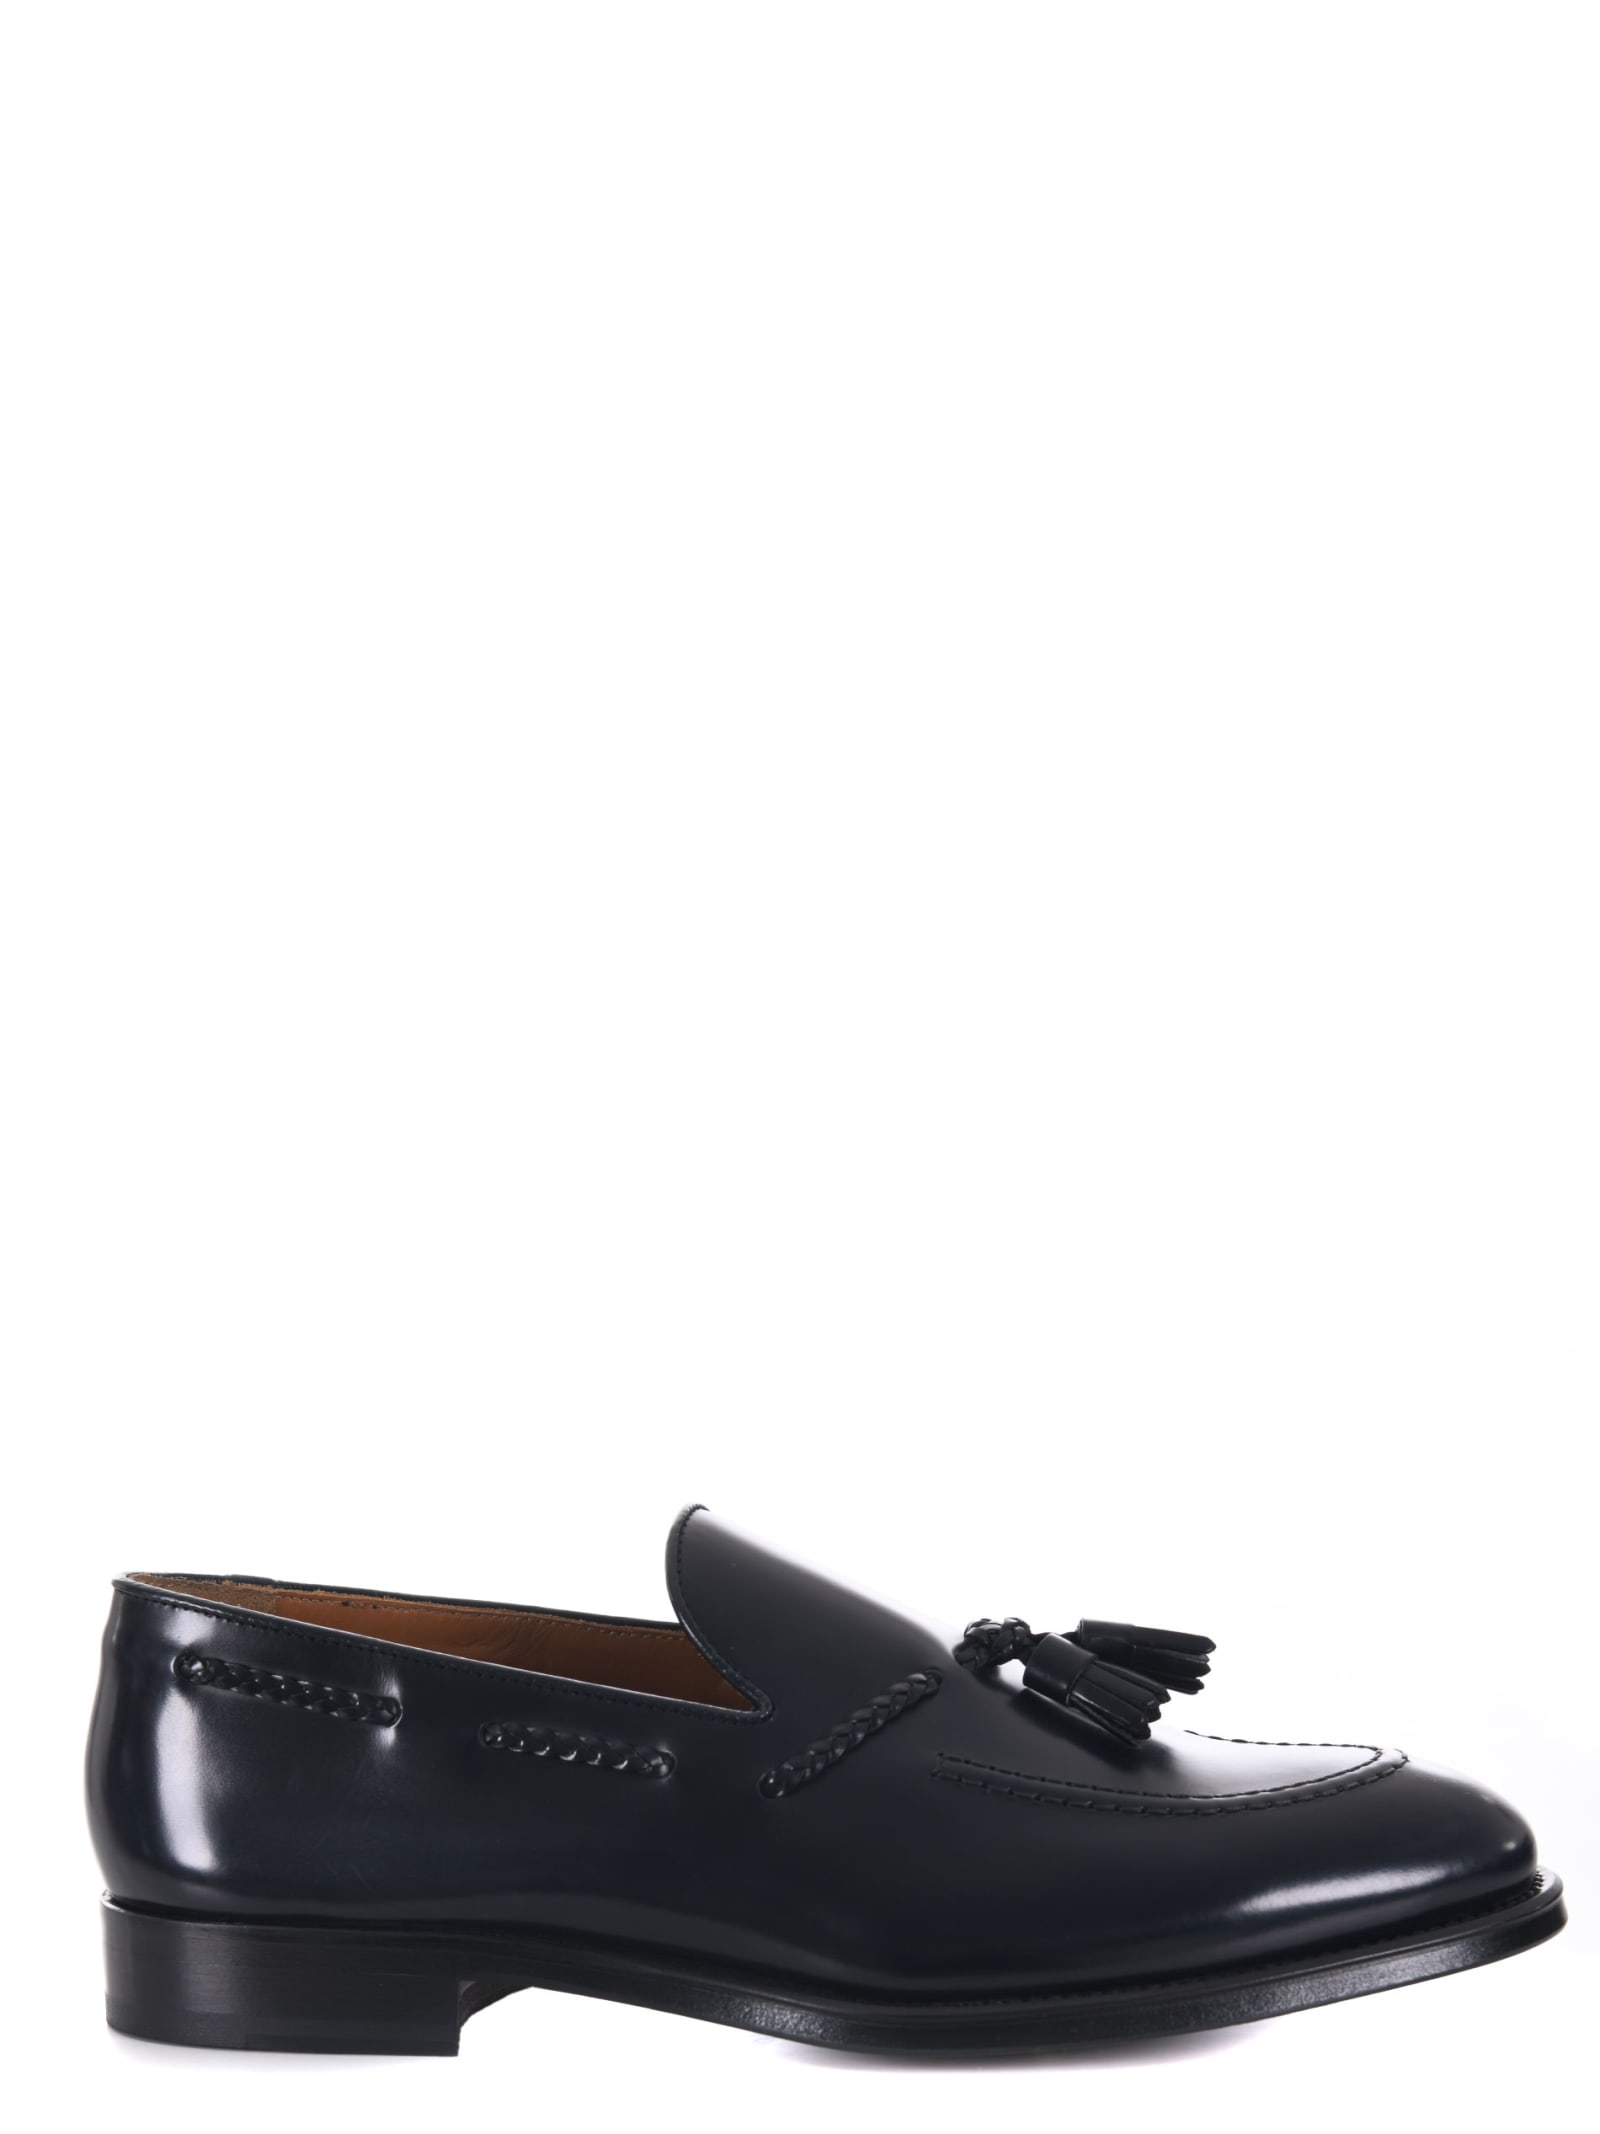 Doucals Loafers